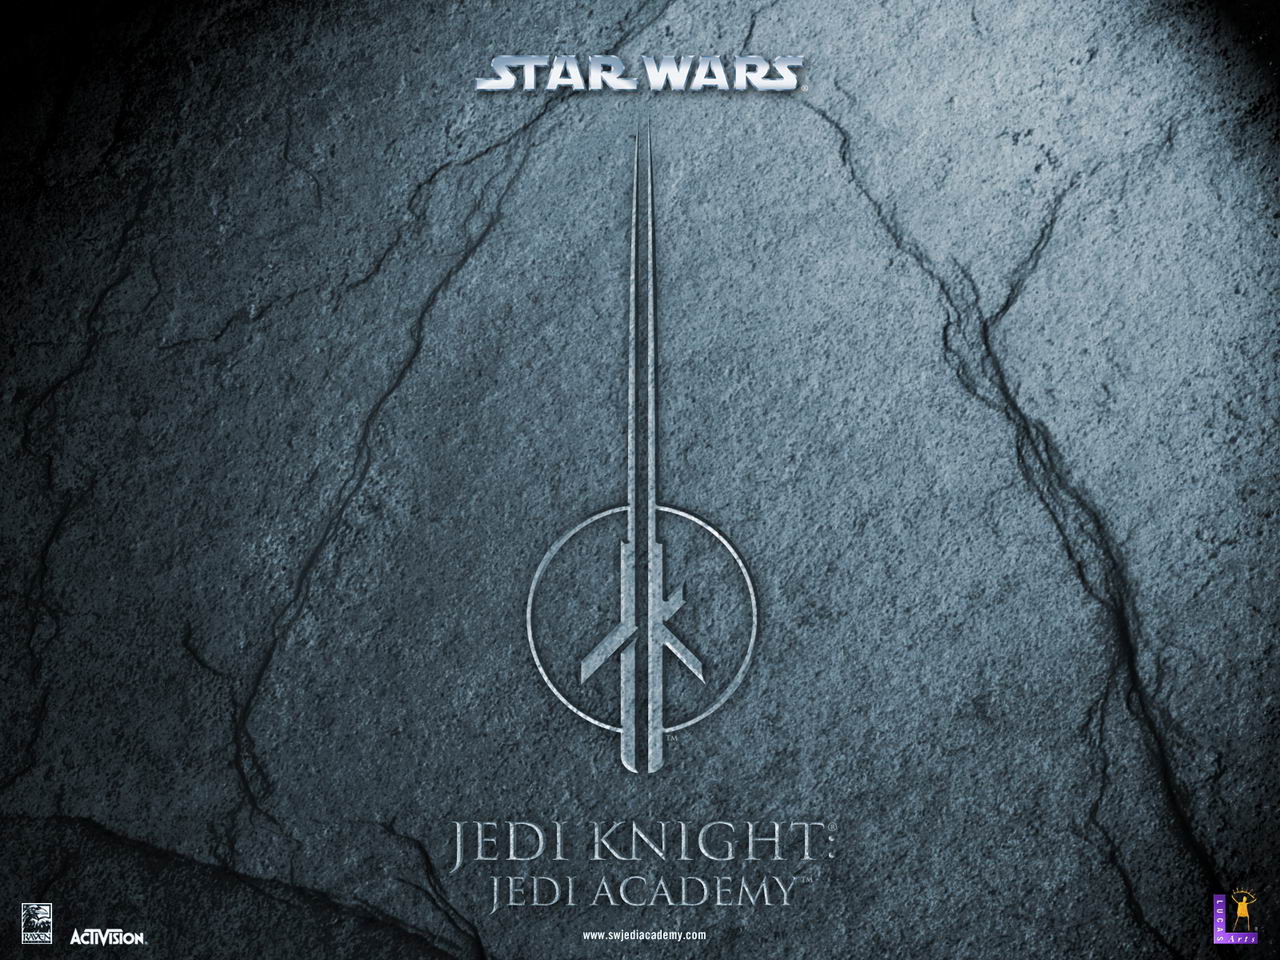 Working-Linux-Port-of-Jedi-Knight-Jedi-Academy-Available-Download-and-Play-2.jpg